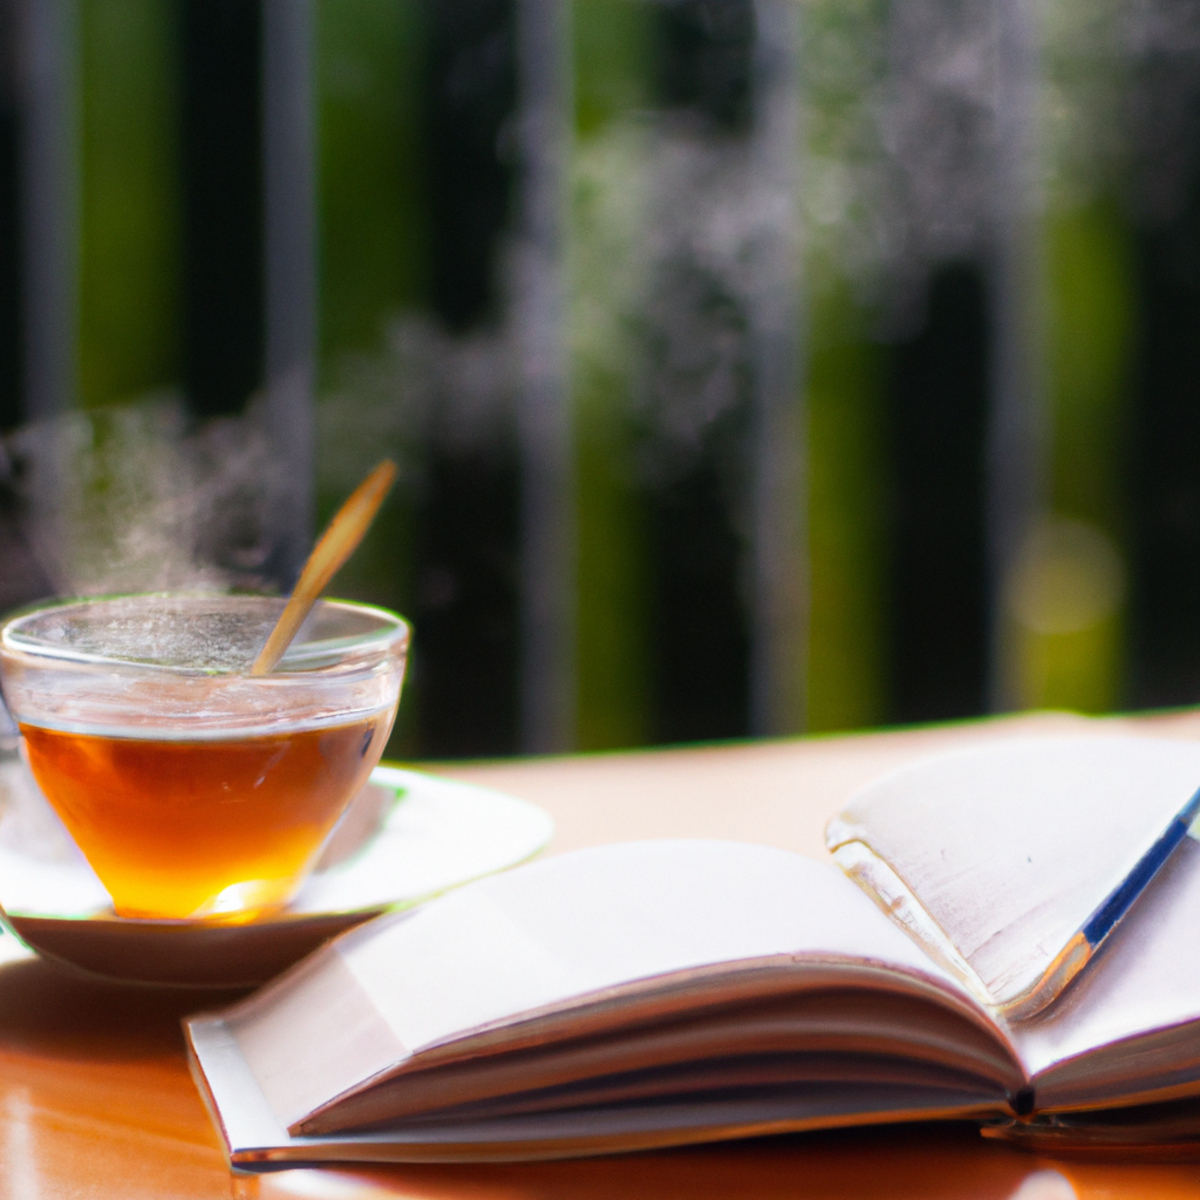 A serene scene of tea, book, journal, and pen on a wooden table, representing stress management and relaxation techniques.